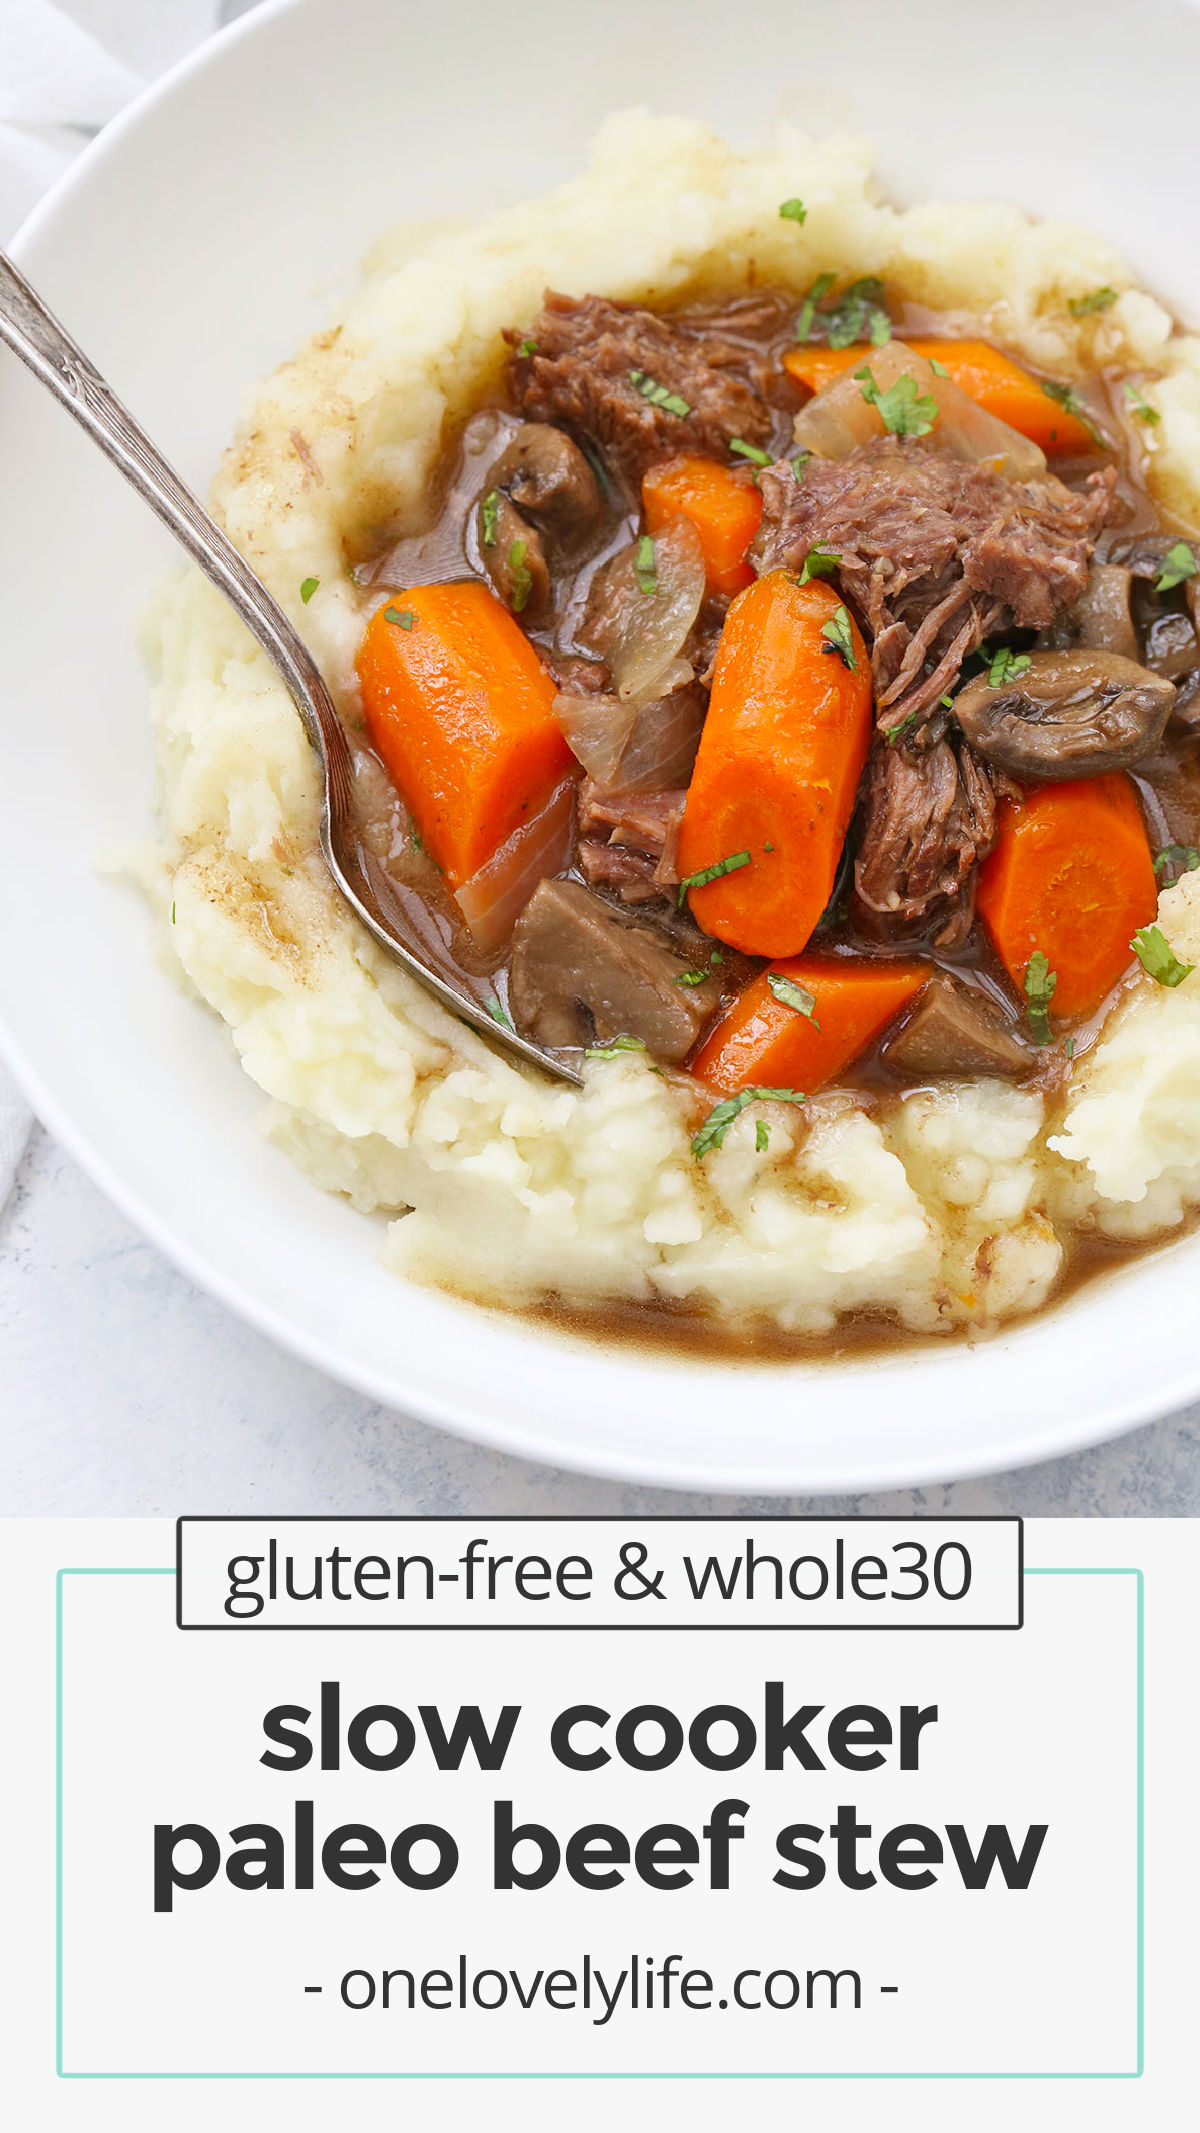 Slow Cooker Beef Stew - This paleo beef stew couldn't be easier! Let the slow cooker do the work and enjoy a cozy Whole30 dinner! (Paleo & Whole30 Friendly) // crock pot beef stew // whole30 beef stew // paleo beef stew recipe // healthy beef stew // crockpot beef stew // crockpot paleo beef stew // paleo stew recipe